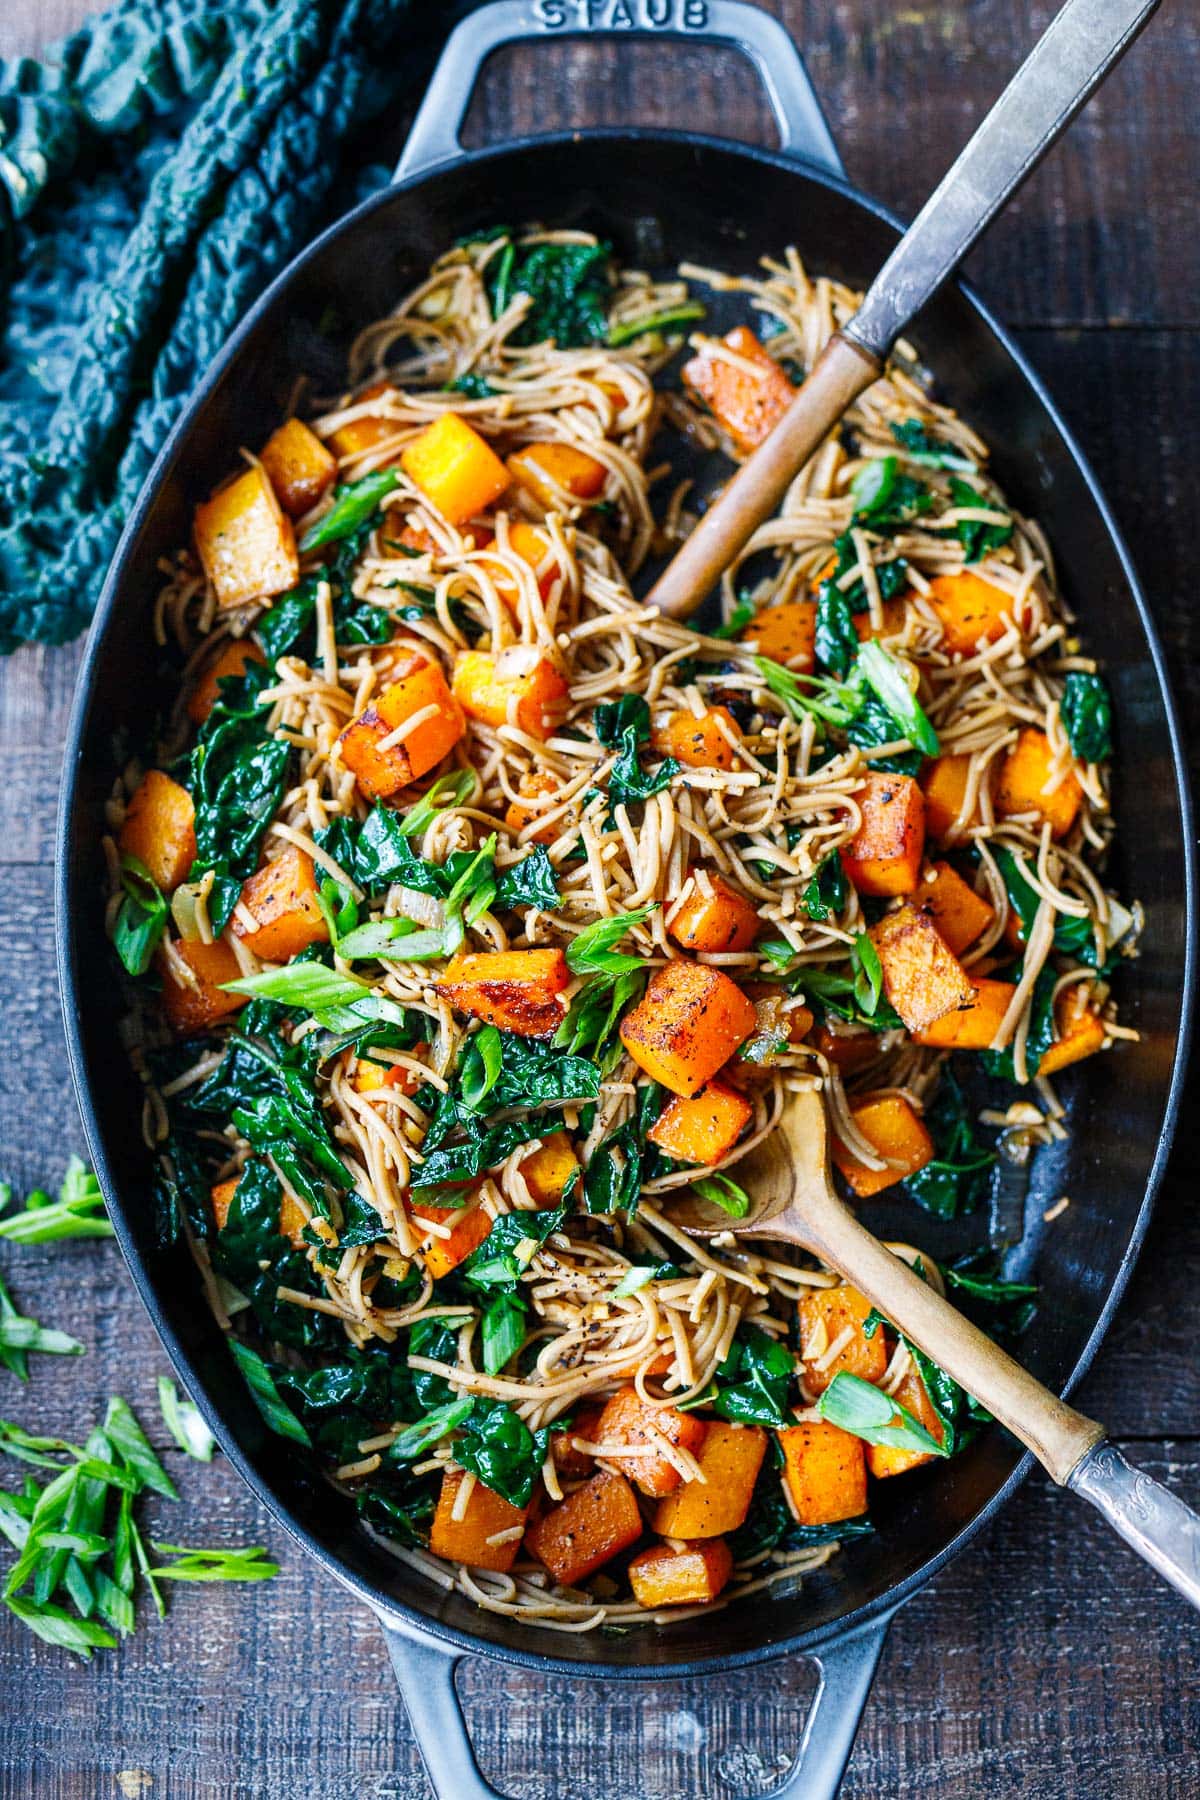 Butternut Squash Noodles are the perfect fall meal! Butternut Squash is scented with Chinese 5-spice, roasted, and tossed with kale and buckwheat noodles in a flavorful stir-fry sauce. 